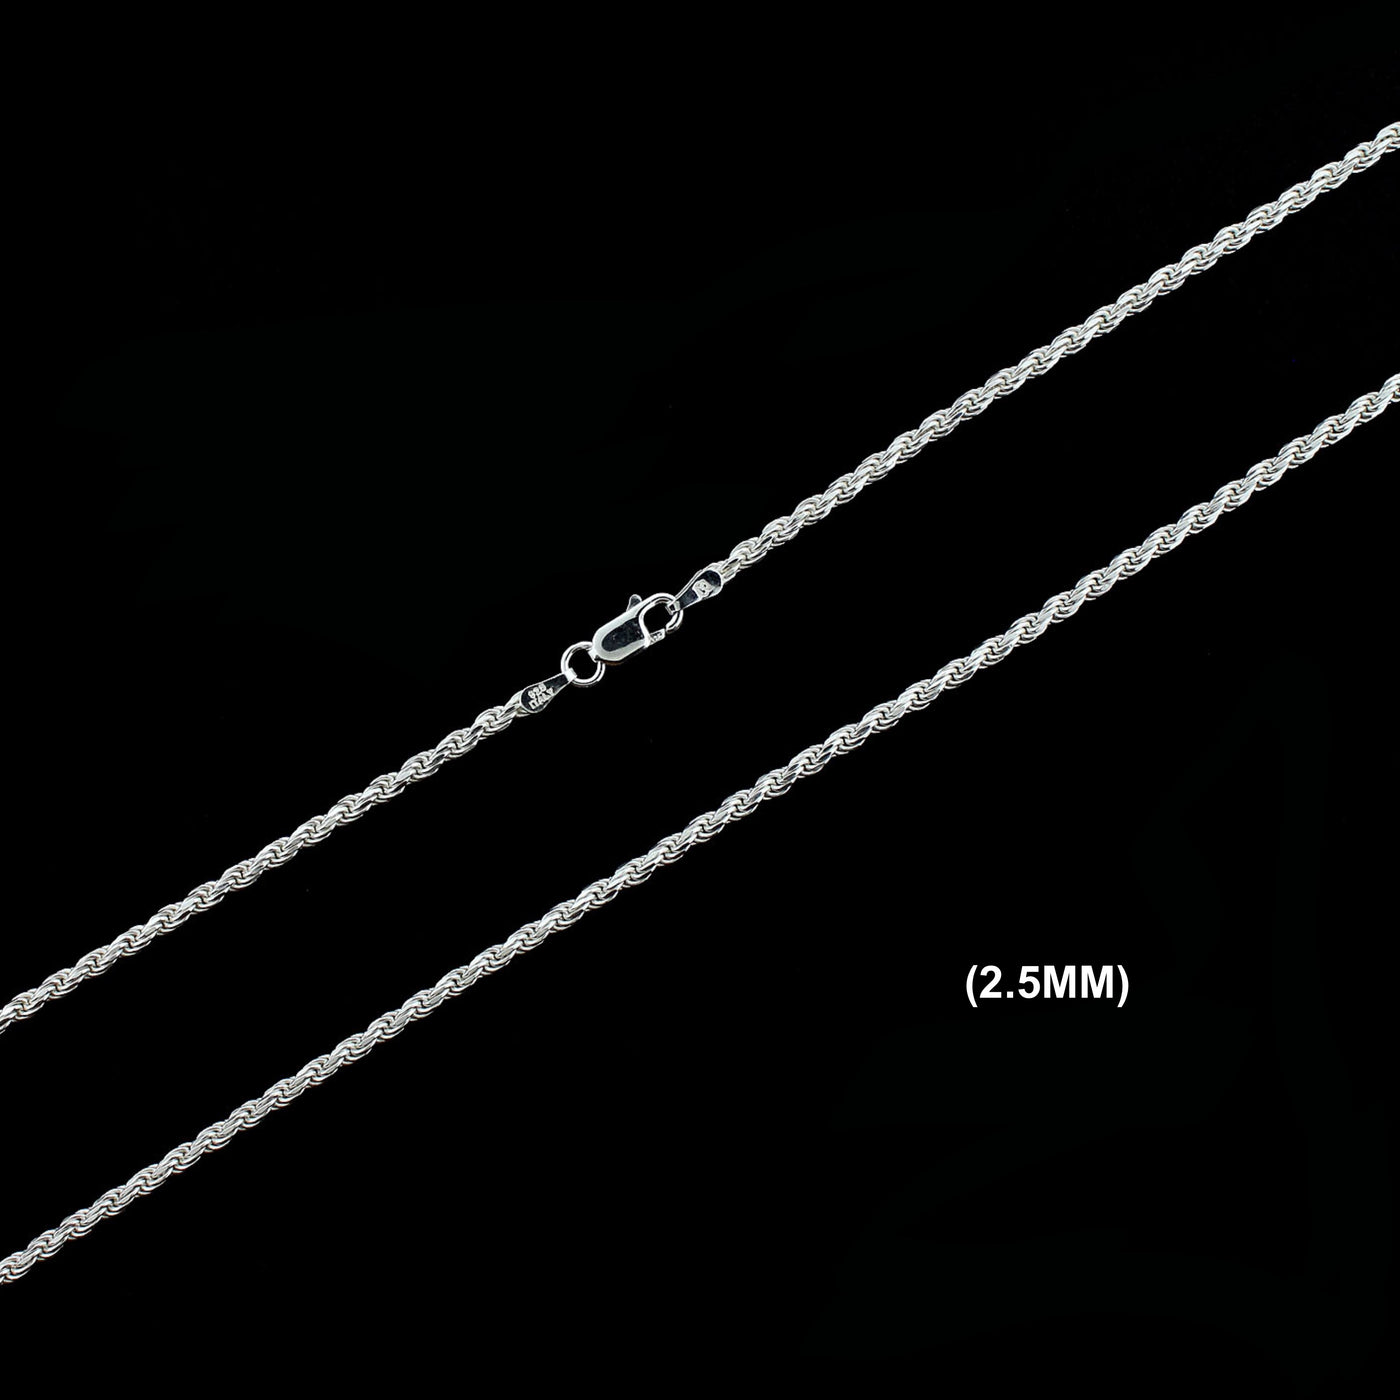 2.5MM Solid 925 Sterling Silver Diamond-Cut Rope Chain Necklace or Bracelet ITALY